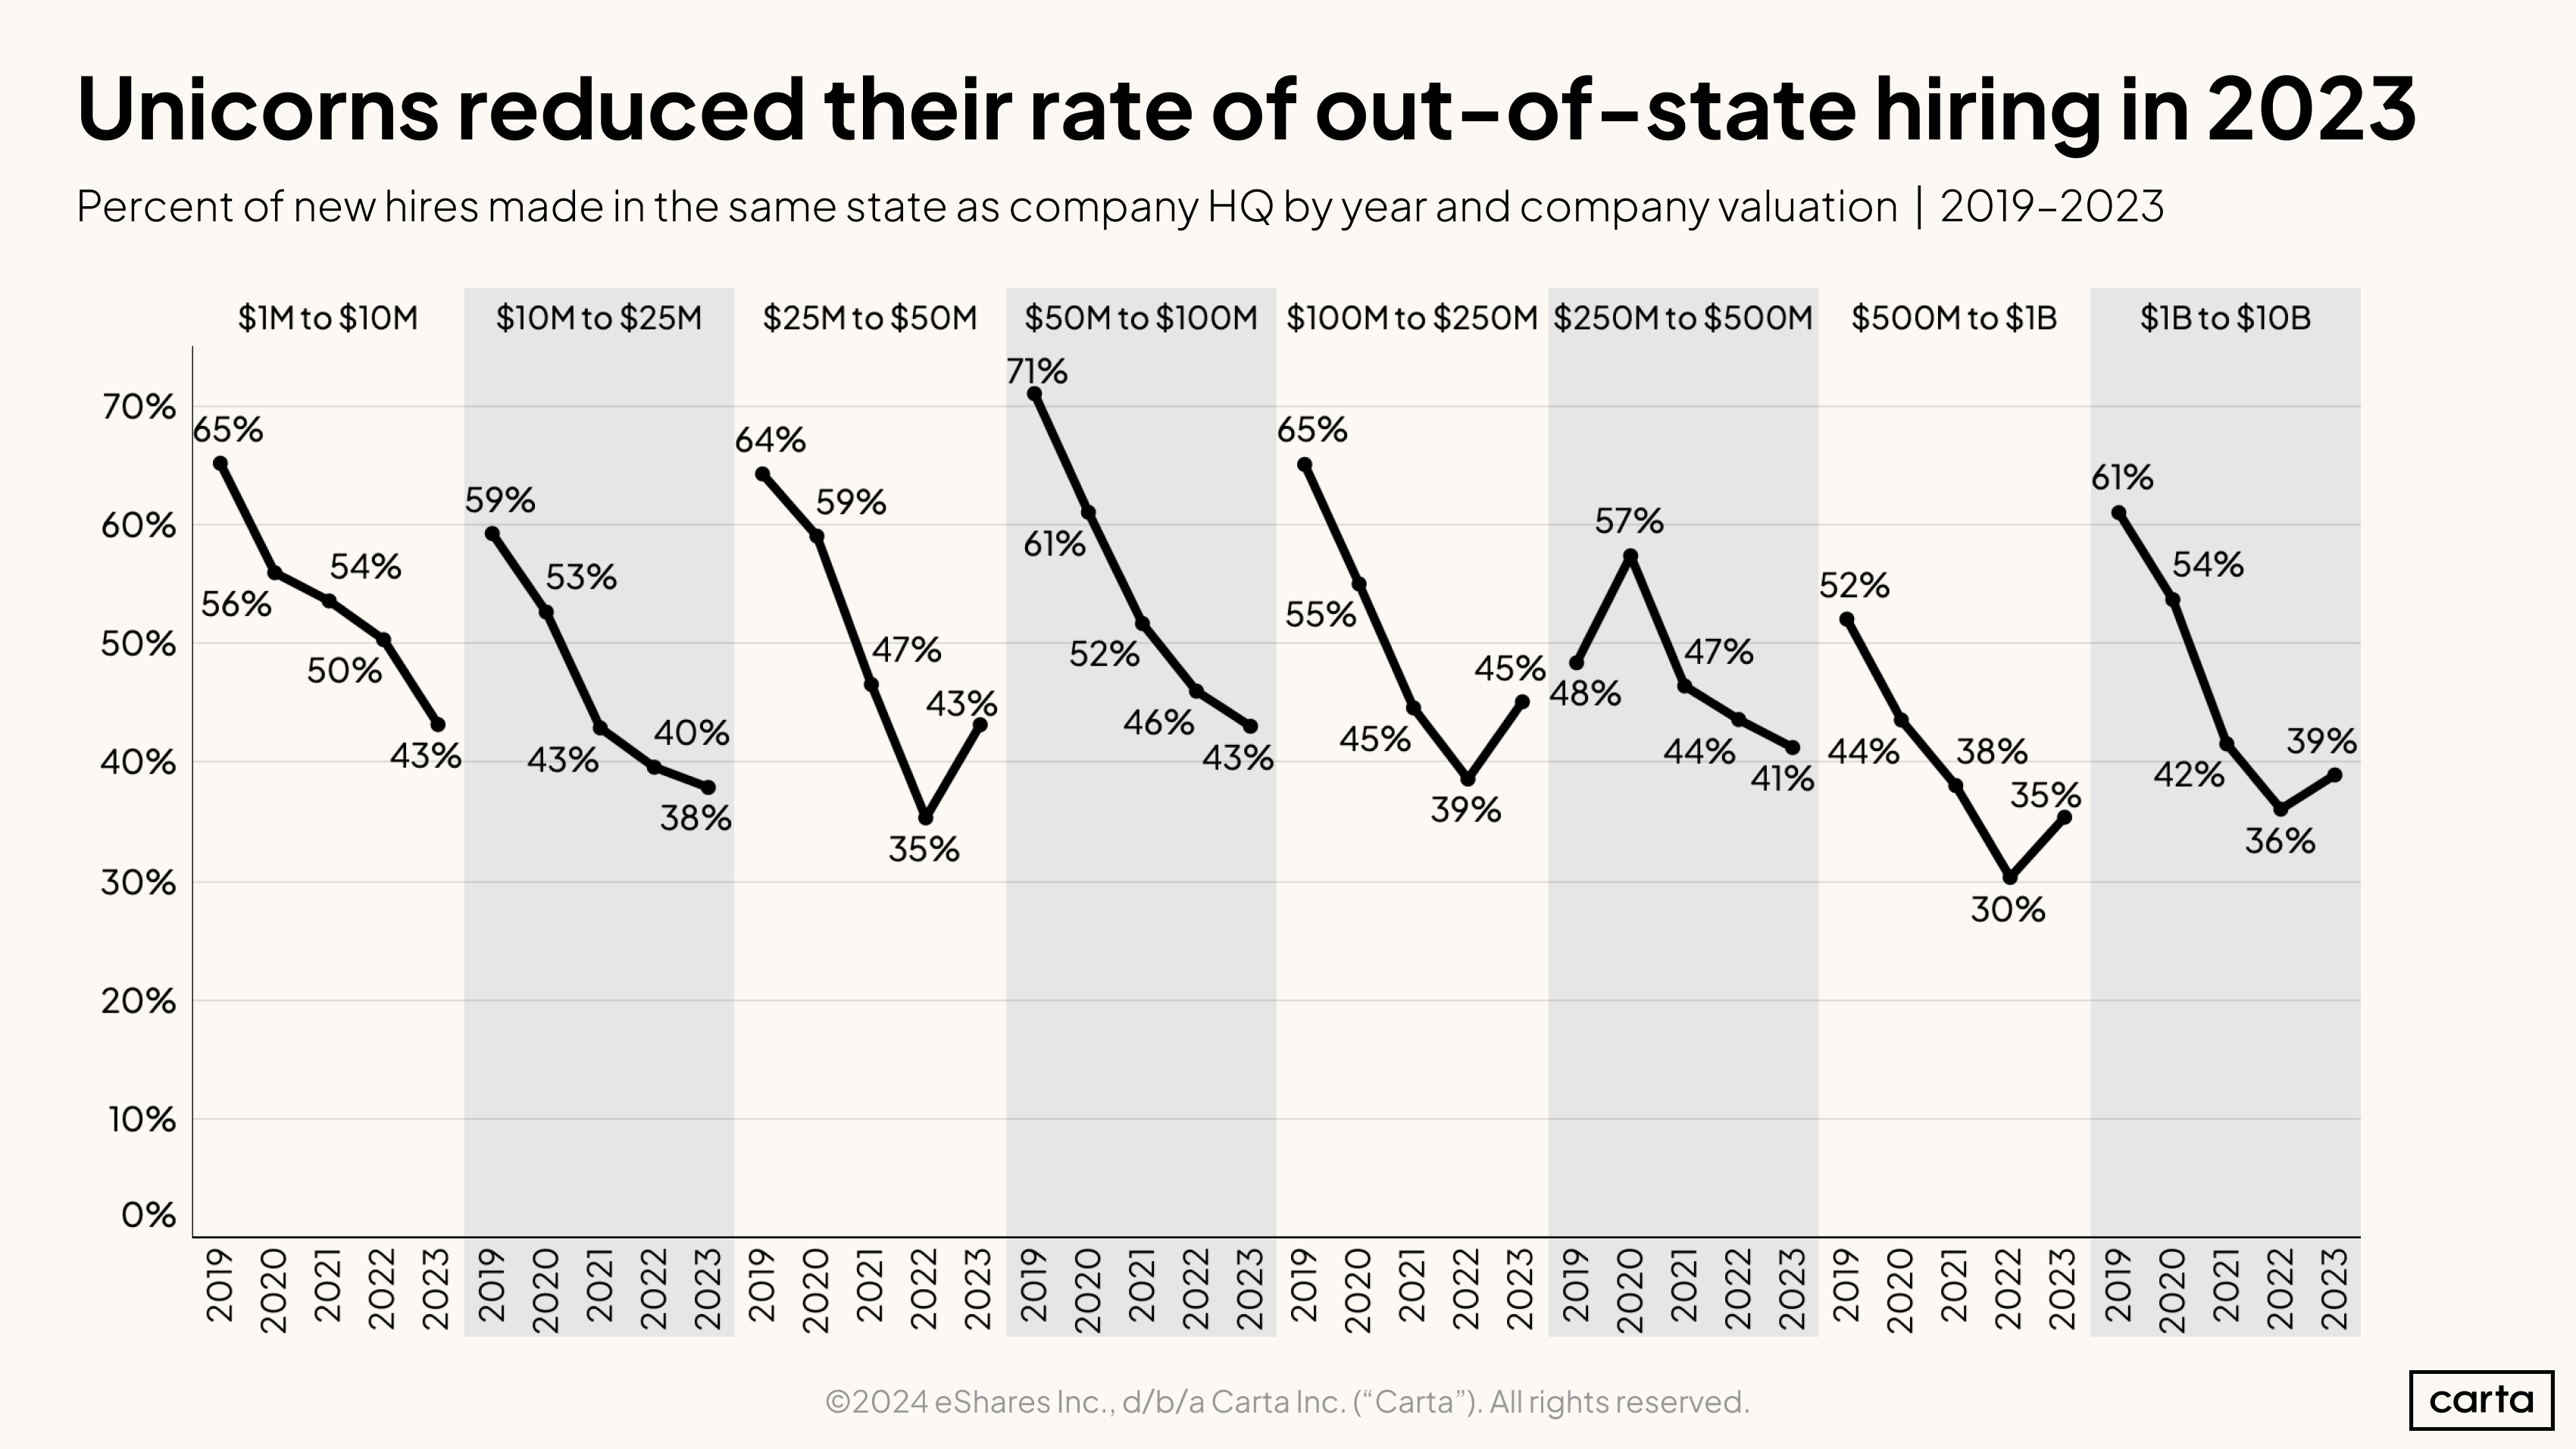 Unicorns reduced their rate of out-of-state hiring in 2023